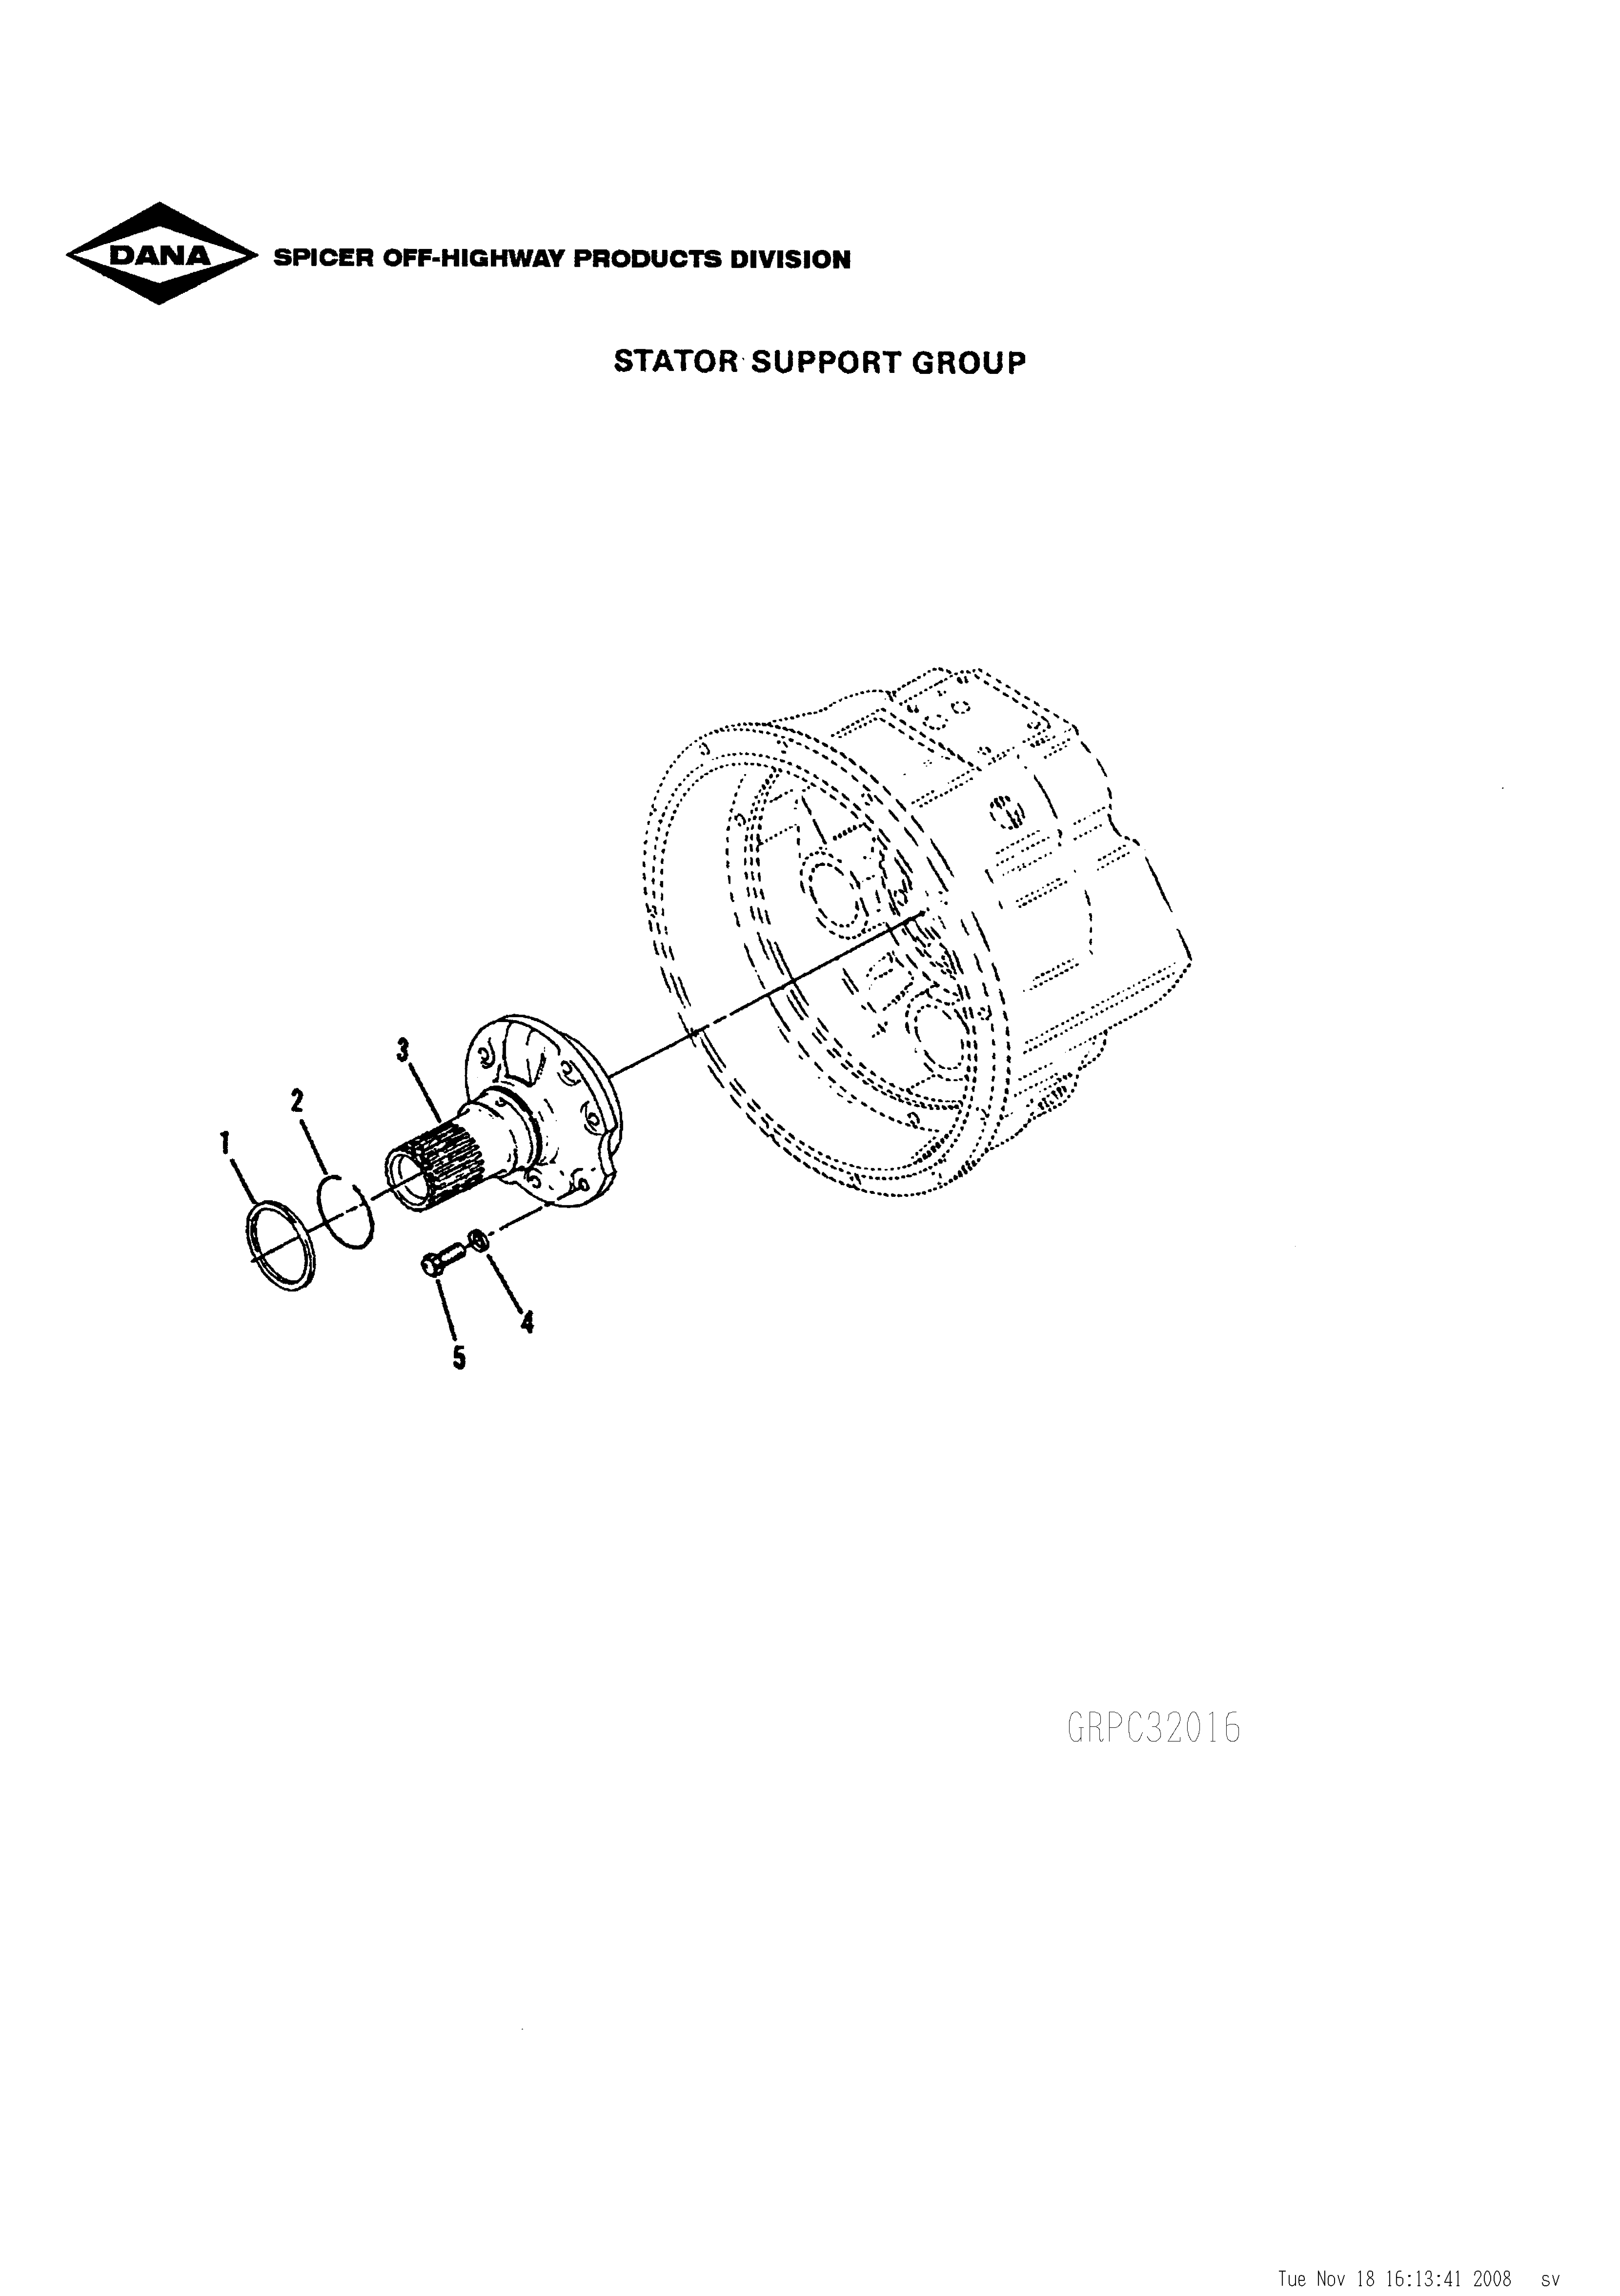 drawing for TELEDYNE SPECIALITY EQUIPMENT 1004577 - PISTON RING (figure 1)